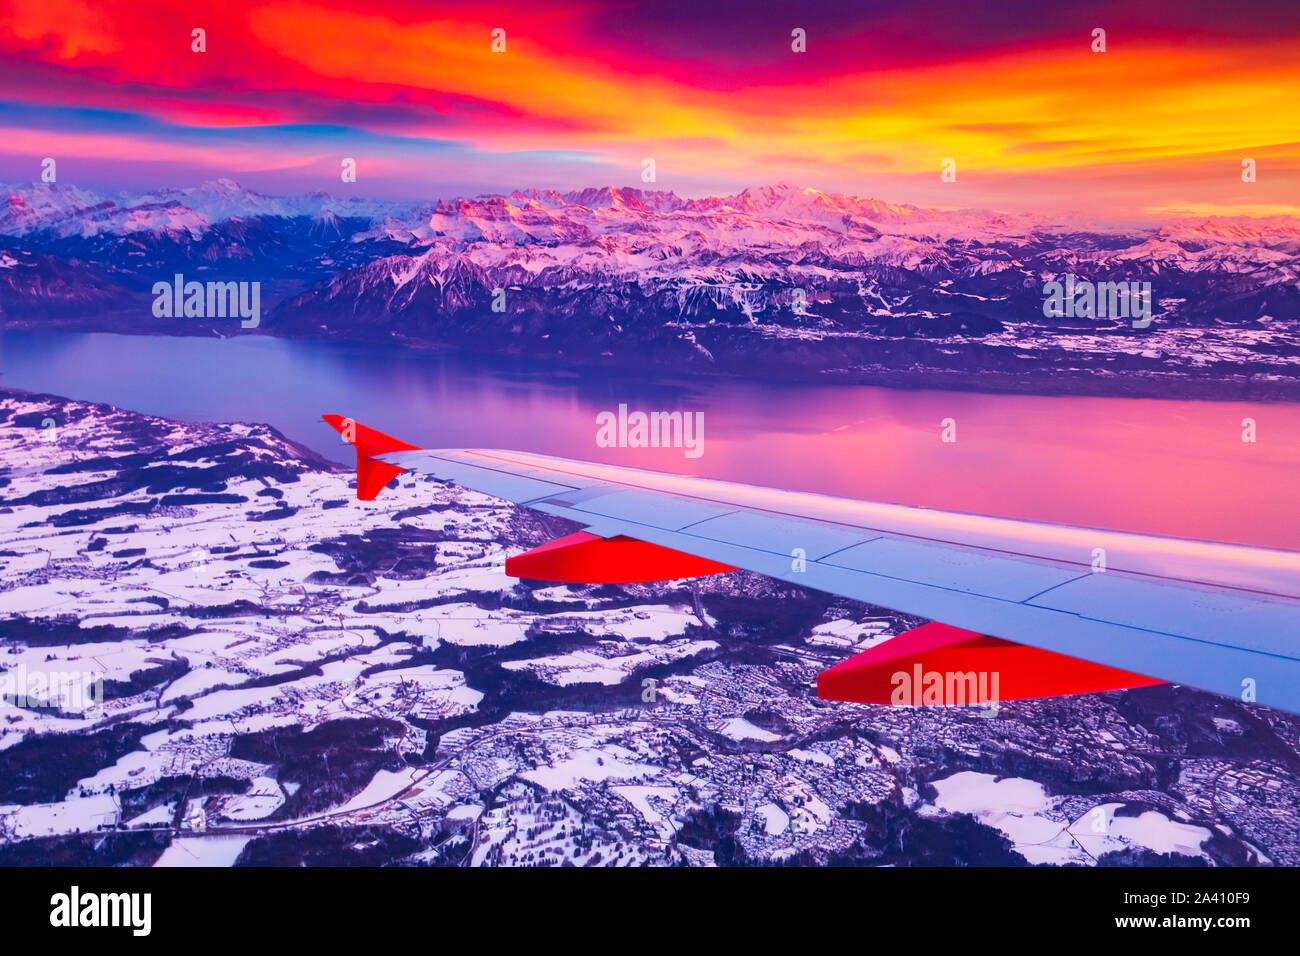 Amazing view from the airplane window during the sunset over mountains in Switzerland Stock Photo